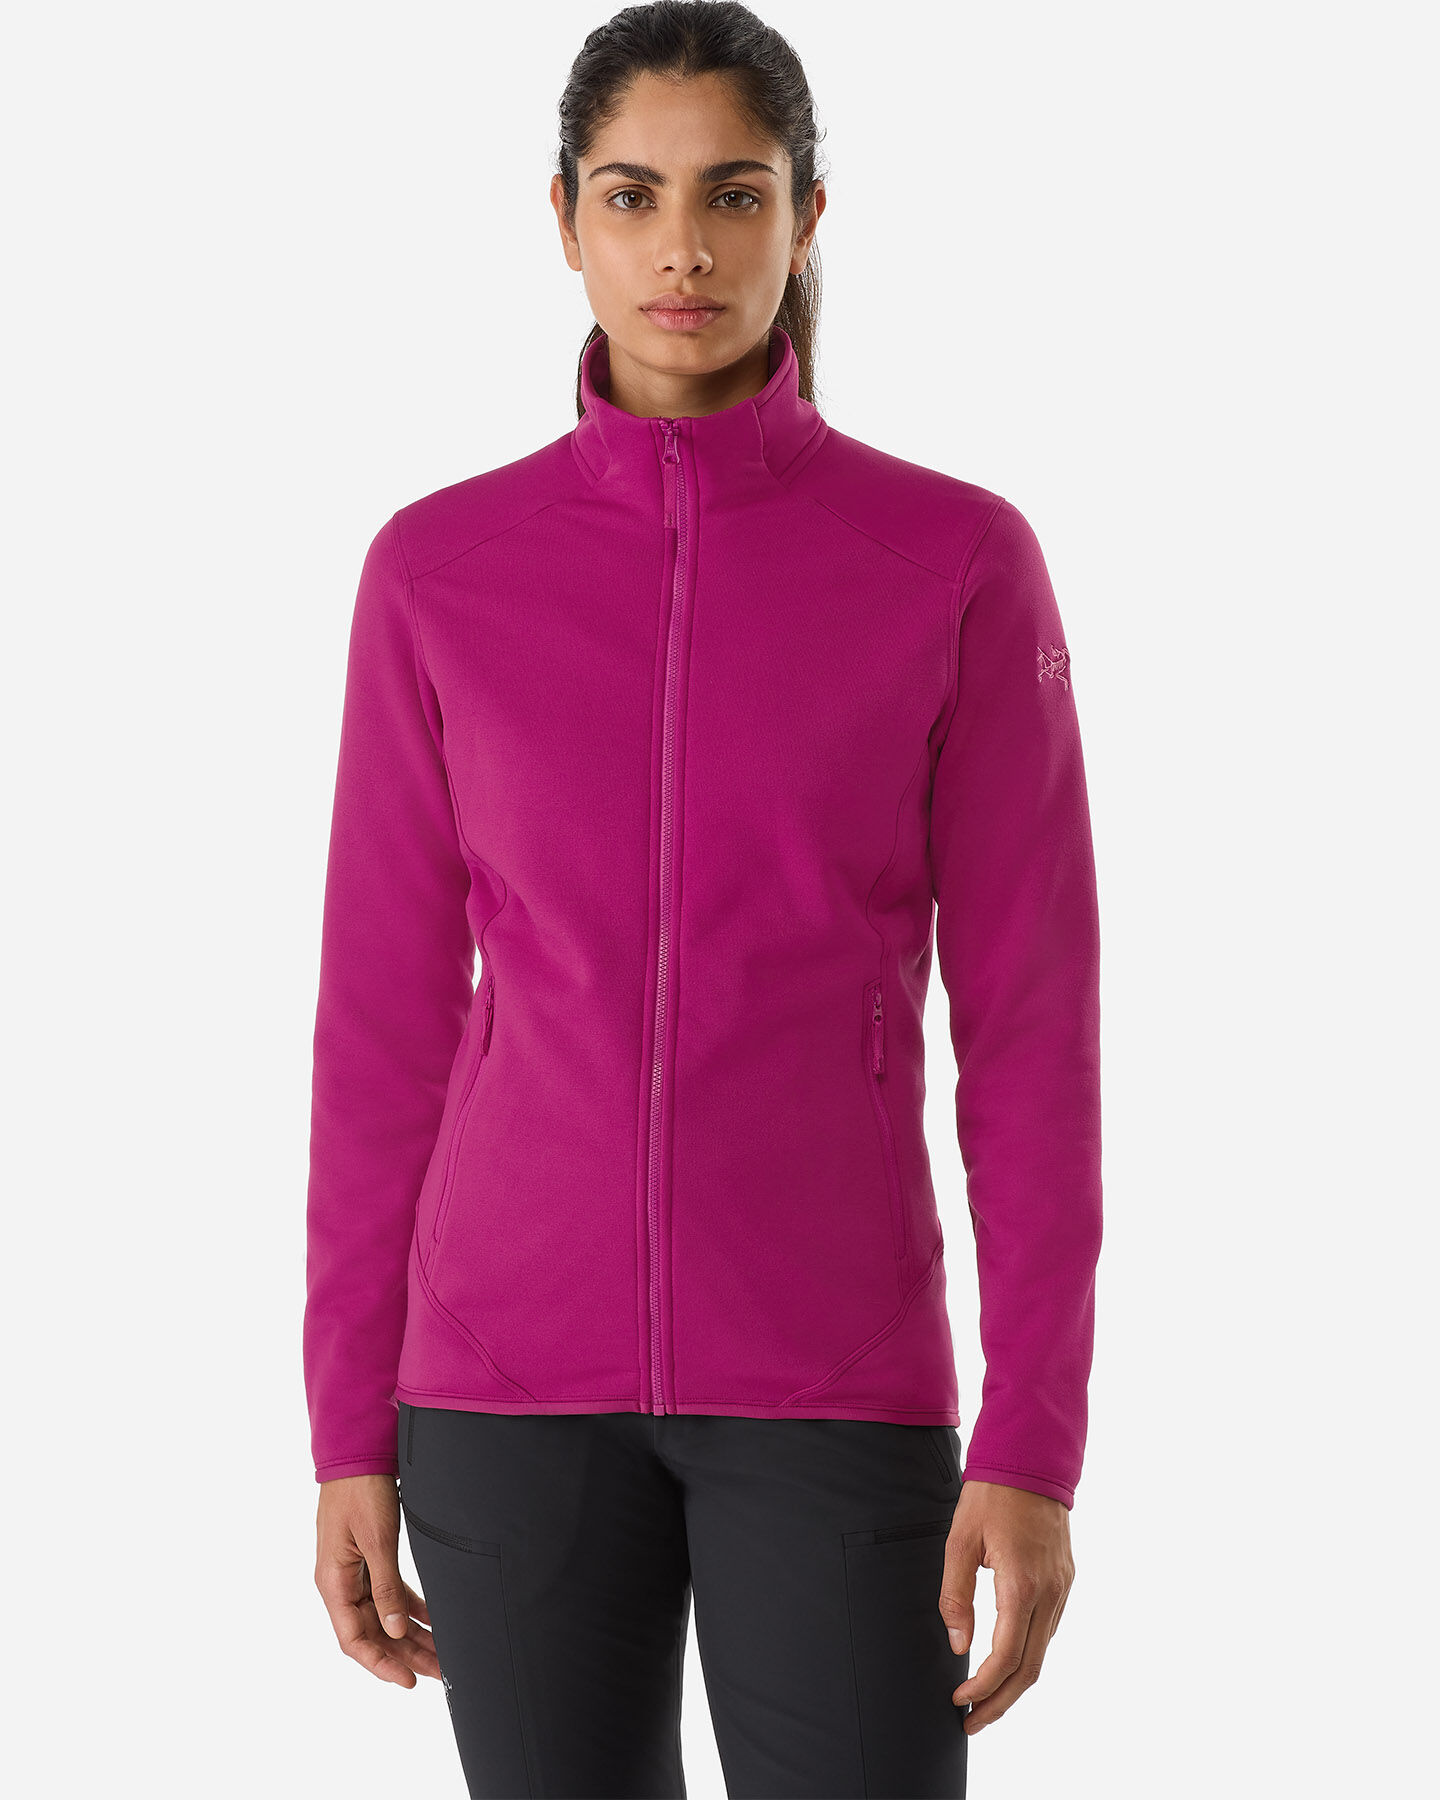  Pile ARC'TERYX KYANITE SYNTH W S4114898|1|XS scatto 1